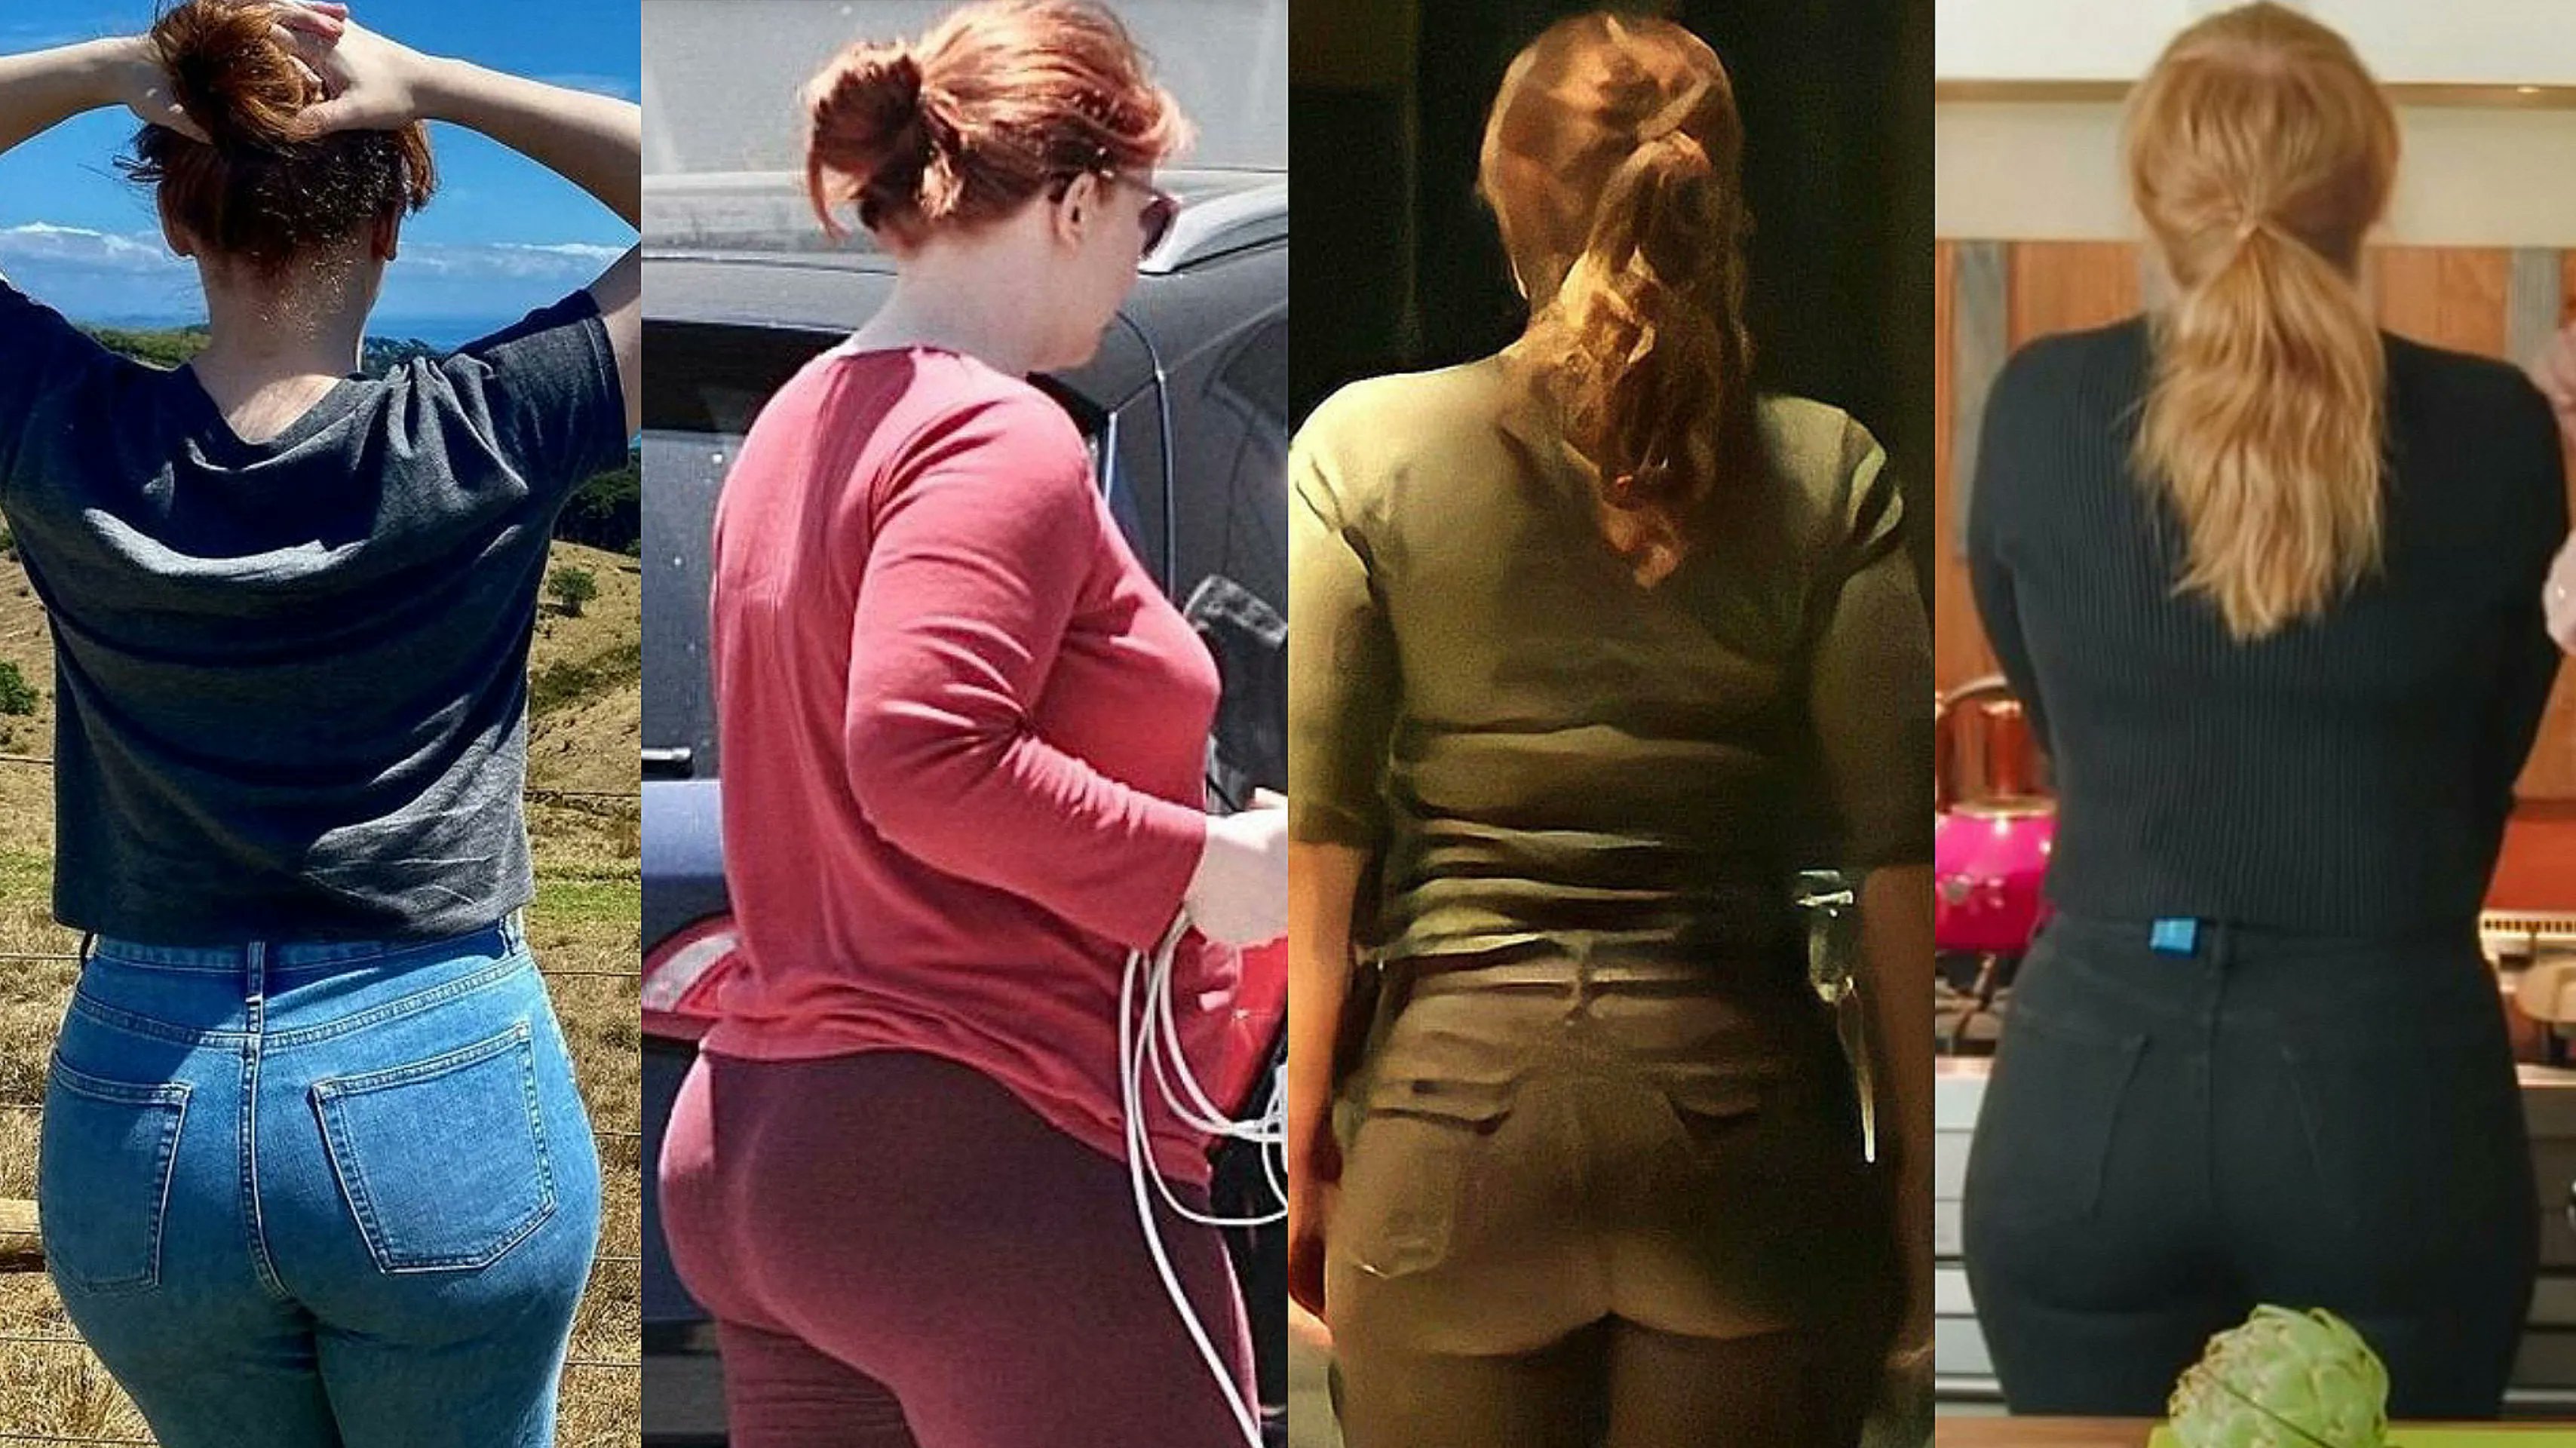 Sluts And Guts On Twitter Bryce Dallas Howard Curves